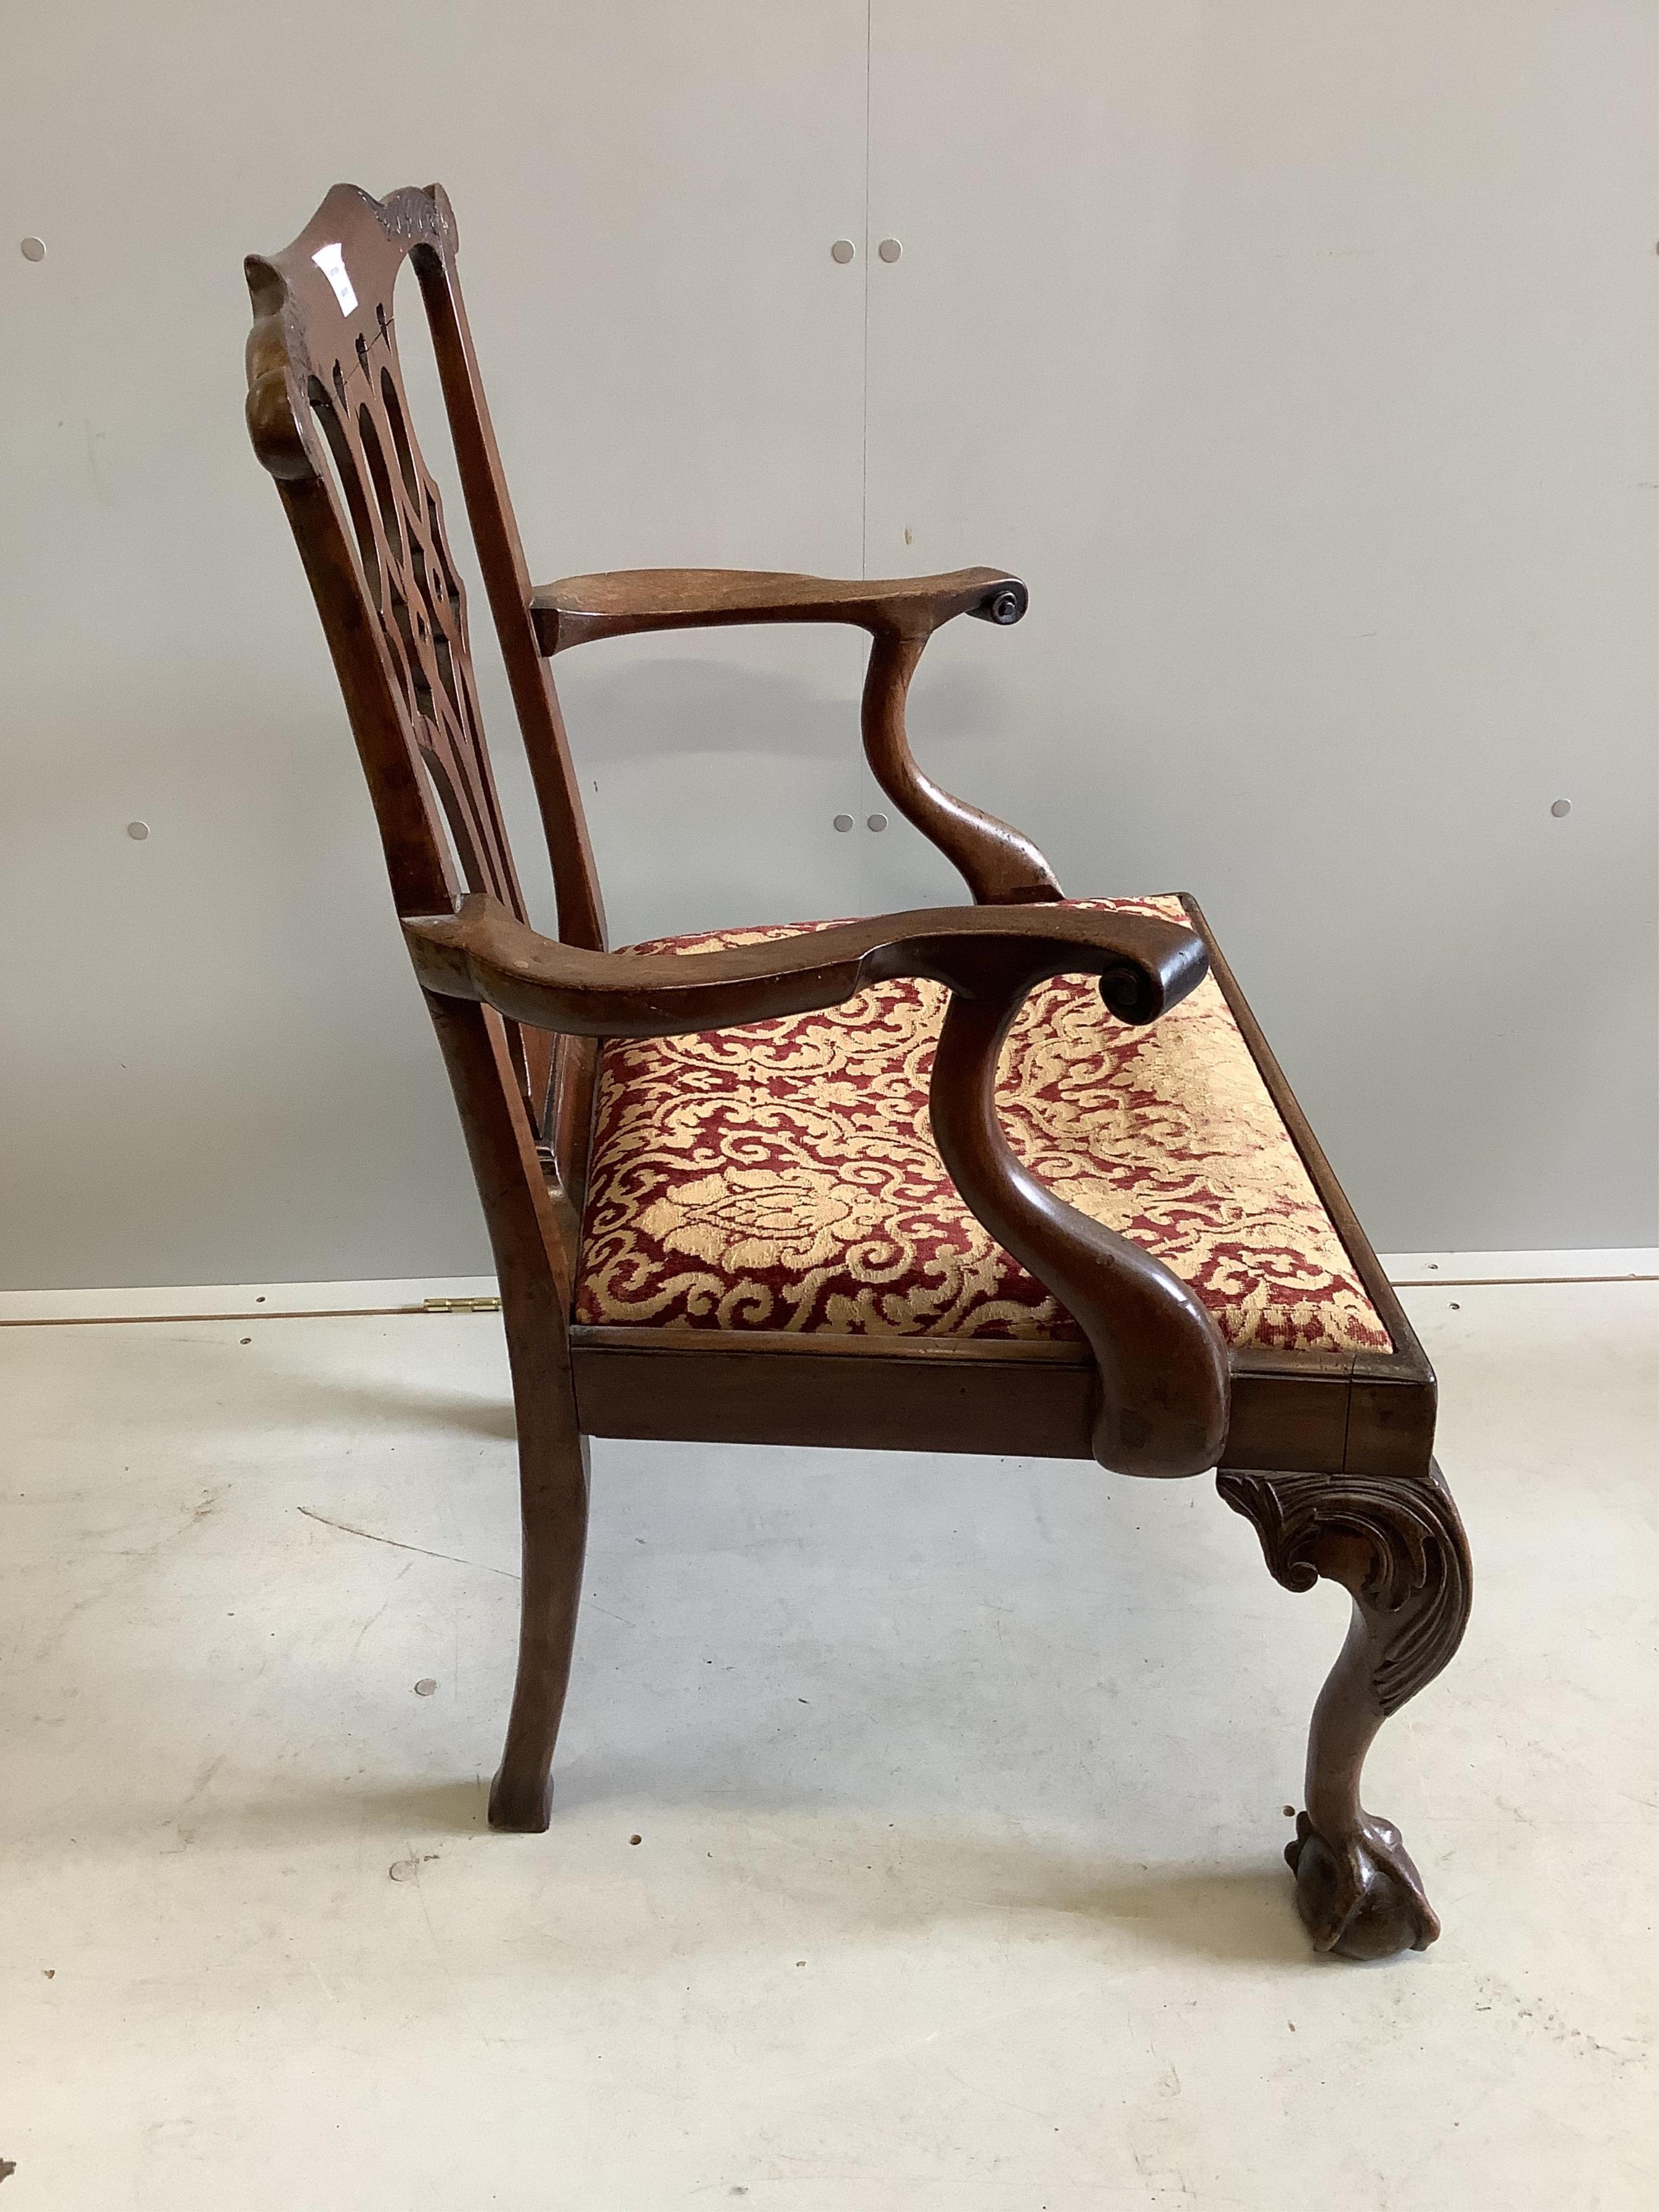 A George III Chippendale style mahogany elbow chair, width 66cm, depth 52cm, height 96cm. Condition - fair